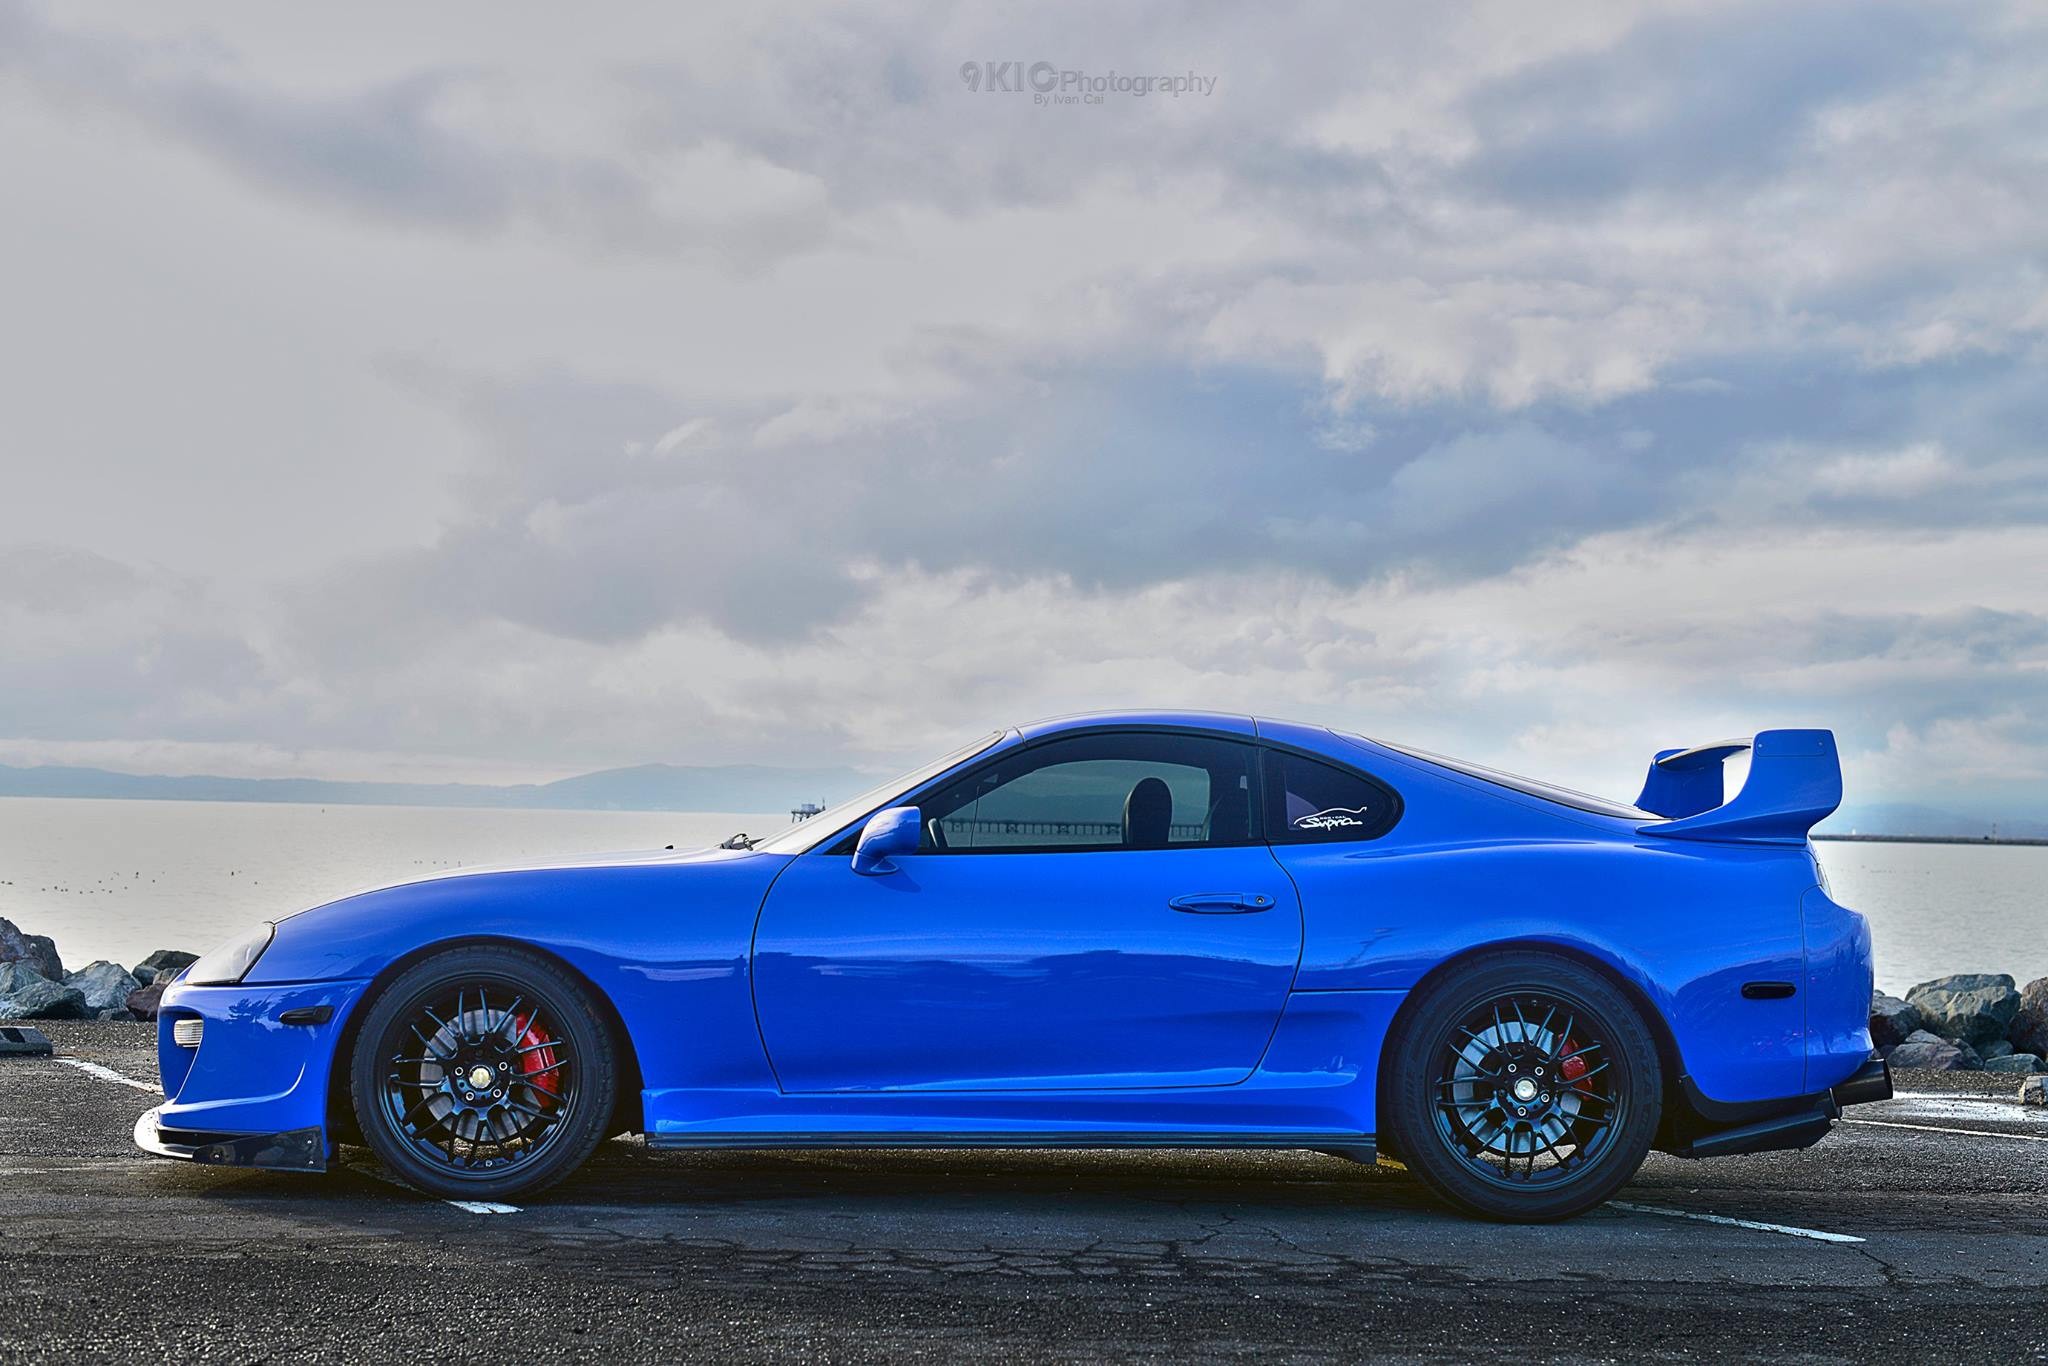 General 2048x1366 car blue cars vehicle Toyota Supra Toyota Japanese cars side view overcast watermarked clouds sunlight